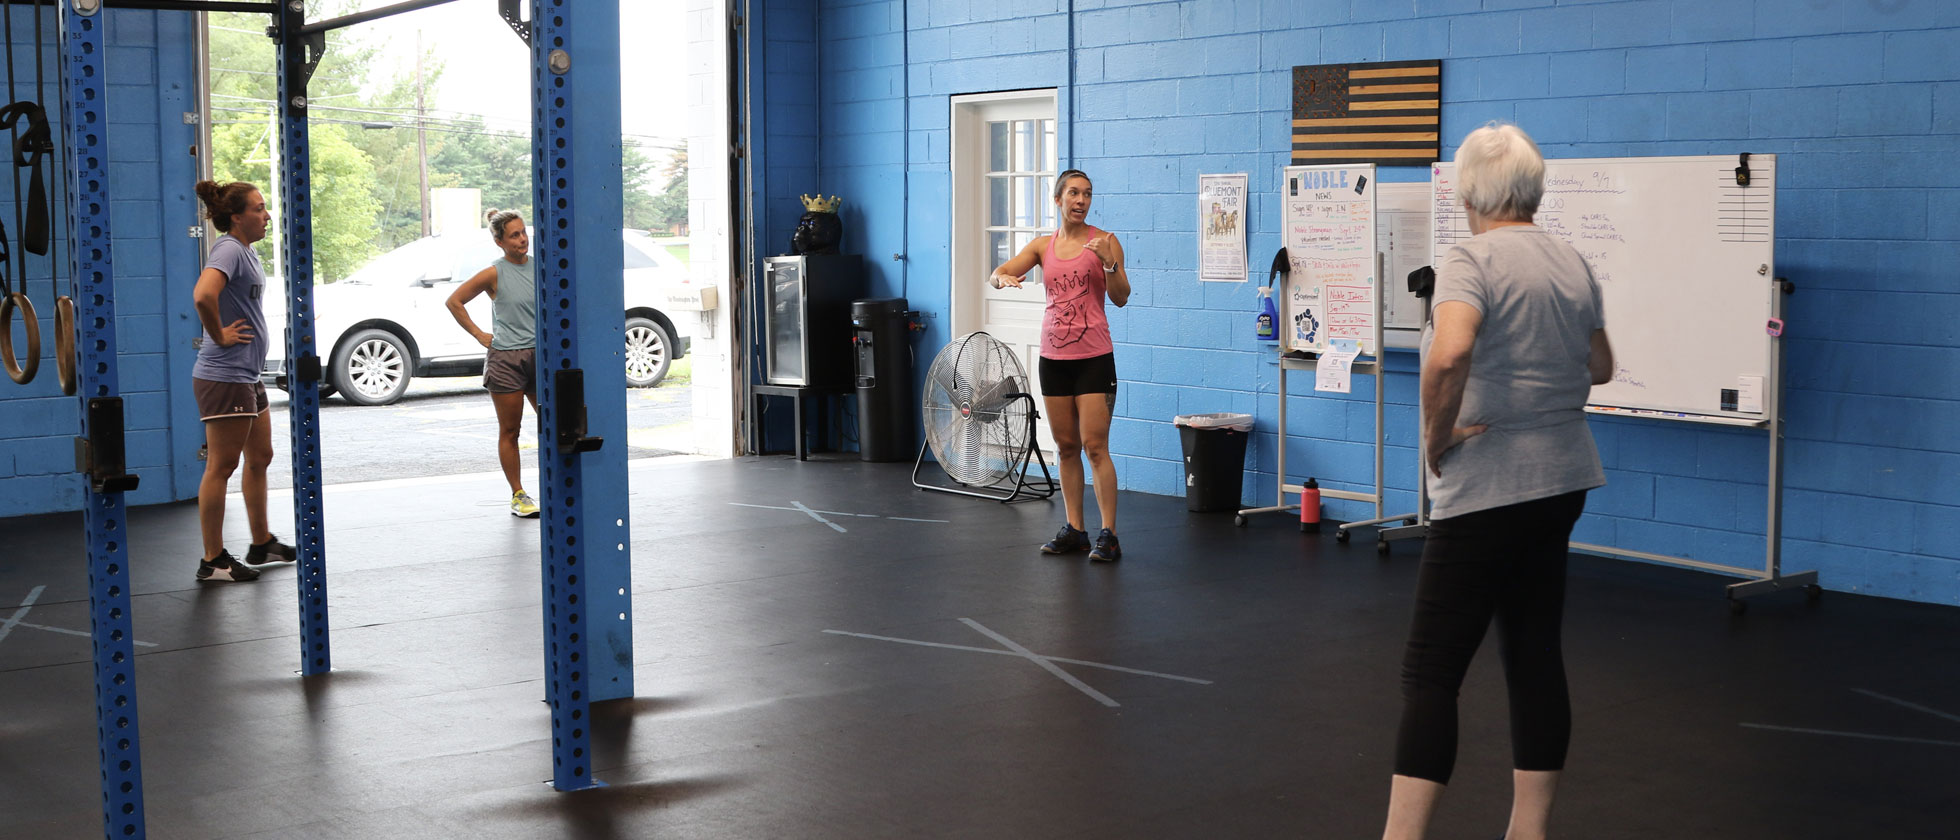 Top 5 Best Gyms To Join Near Sterllng and Purcellville, VA